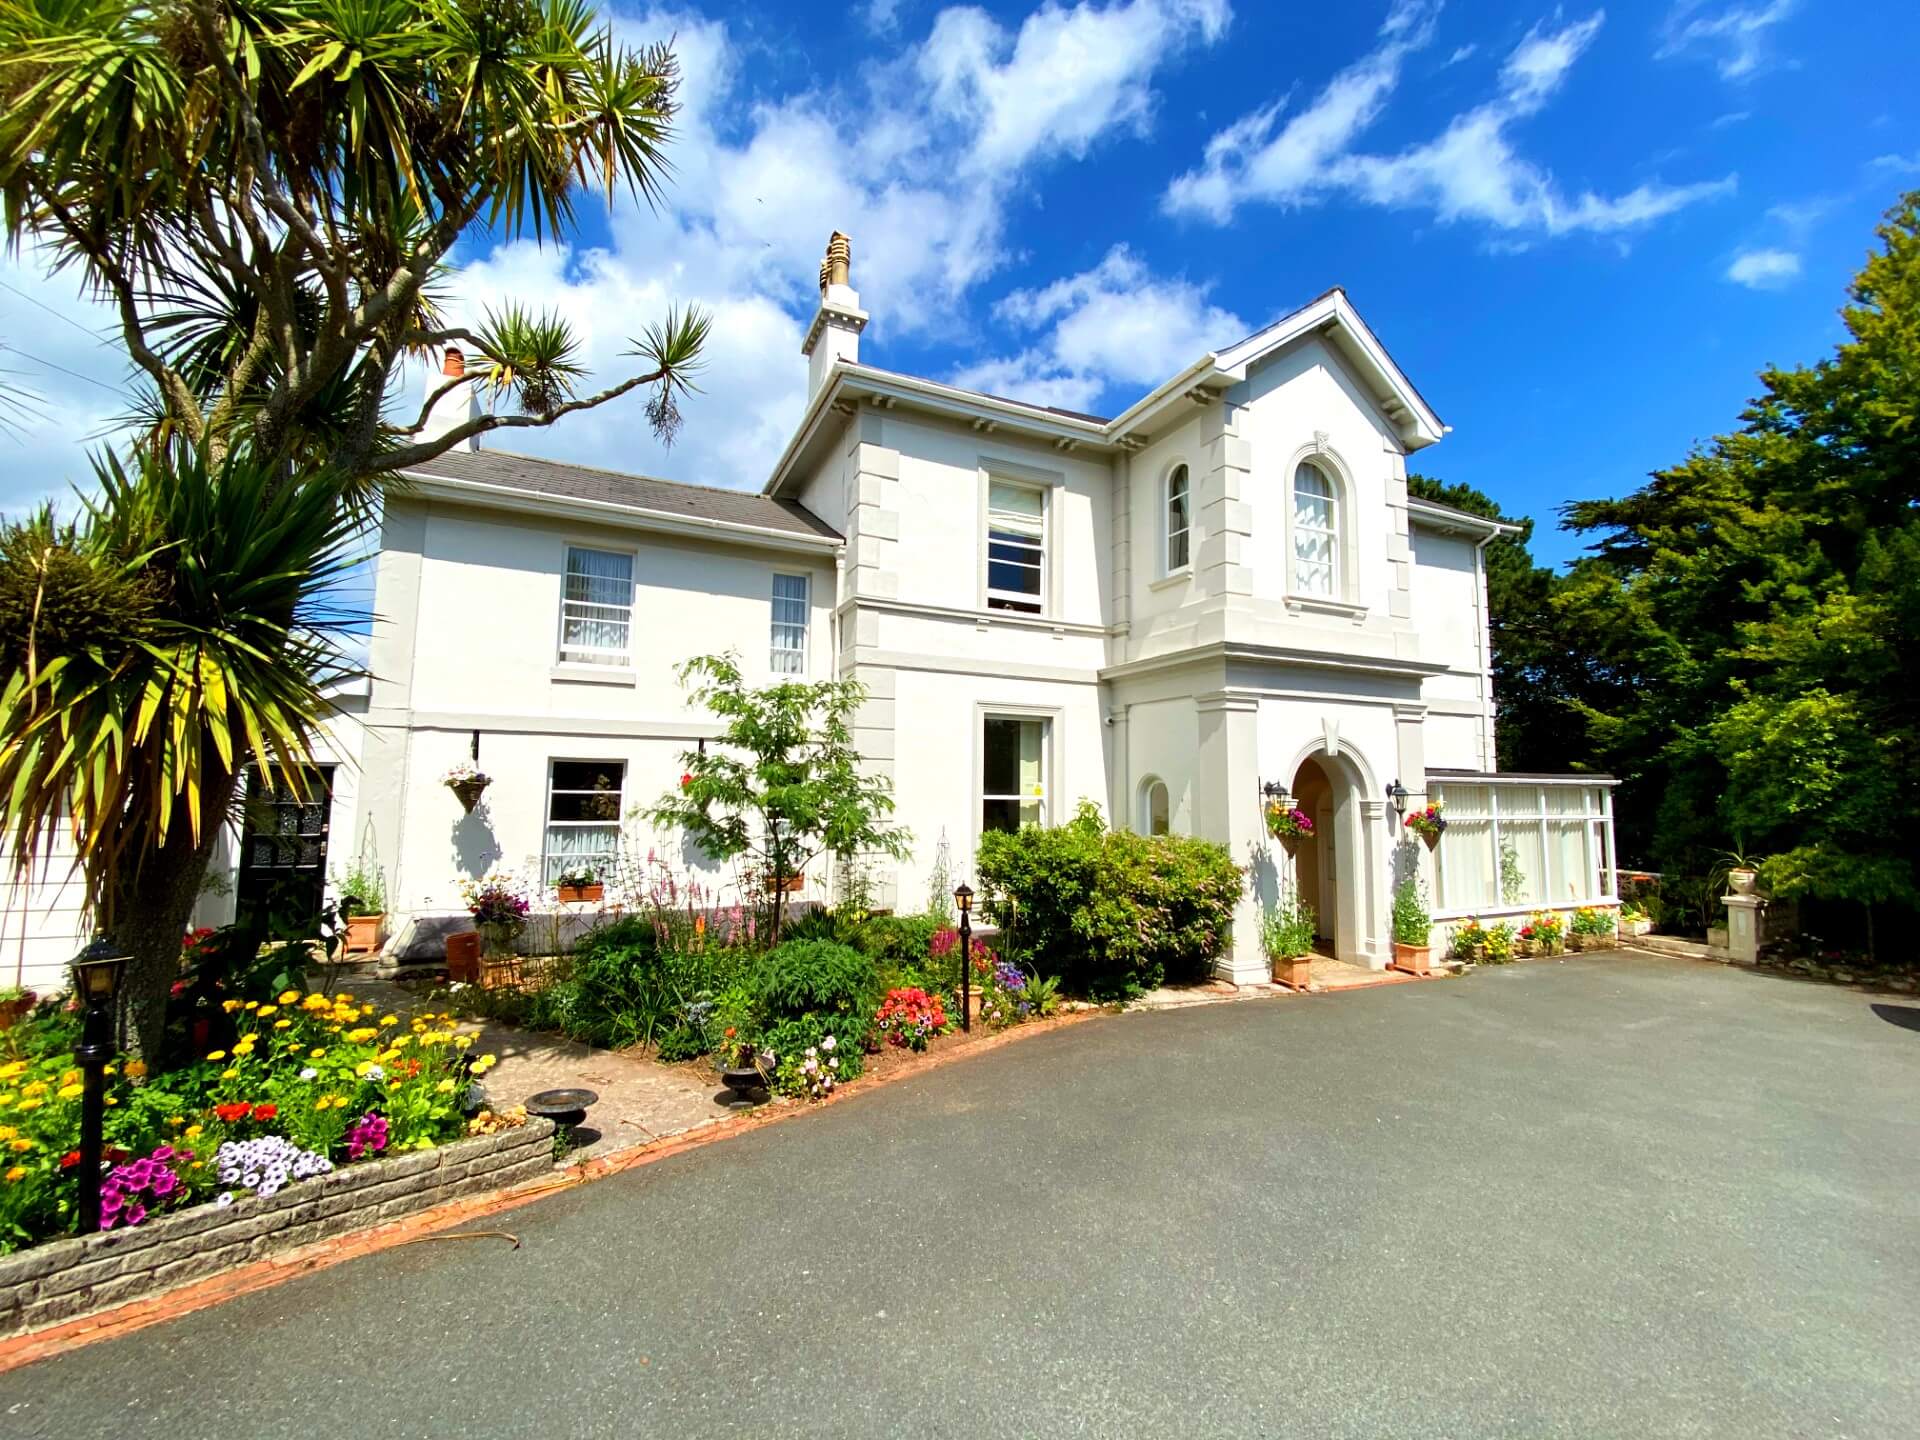 The Muntham Luxury Holiday Apartment and Town House - Dog Friendly Accommodation in Torquay